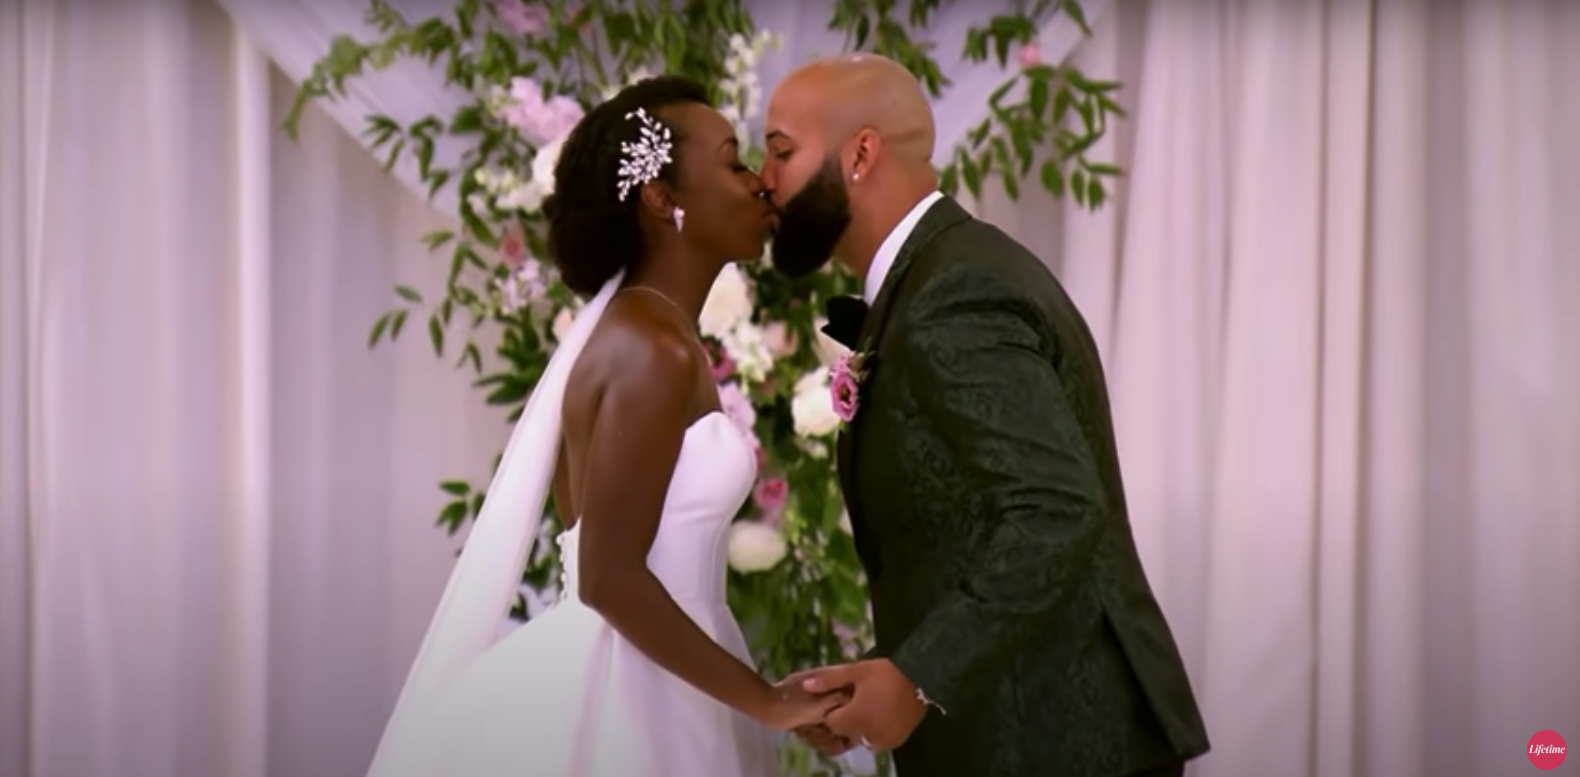 Briana and Vincent kissing on their wedding day on 'Married at First Sight'